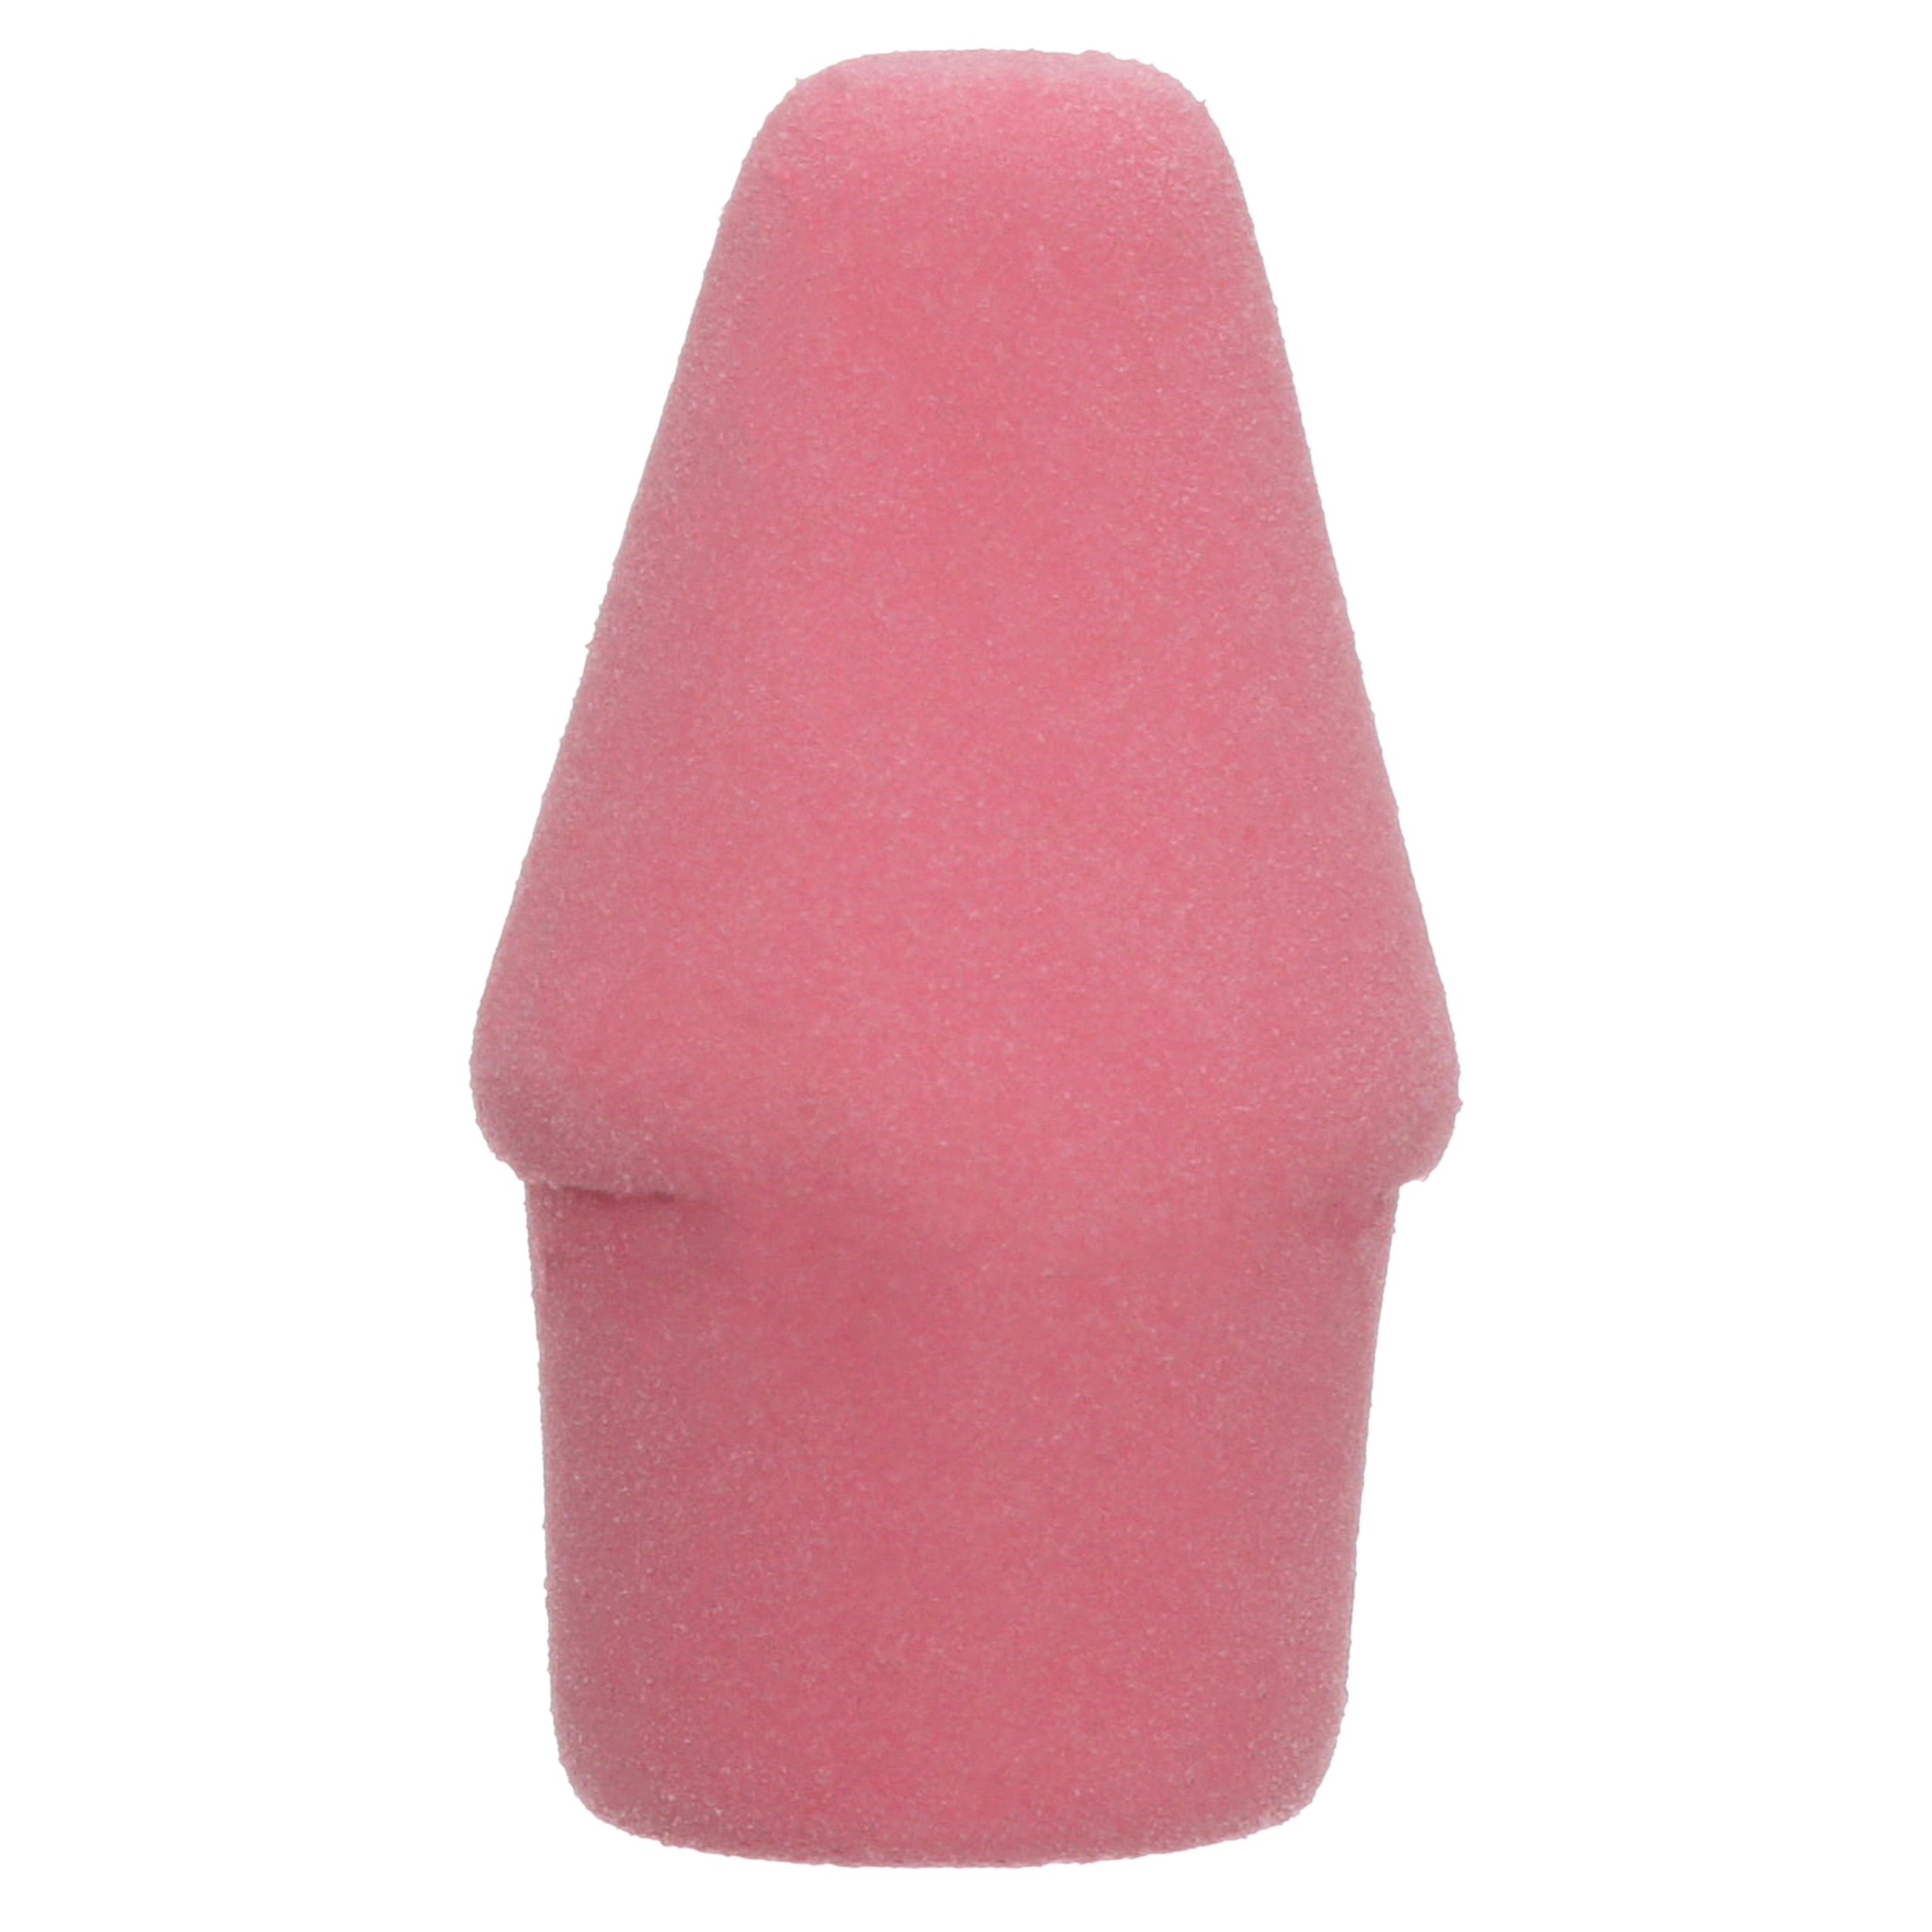 Arrowhead Pink Pearl Cap Erasers 144 Count 